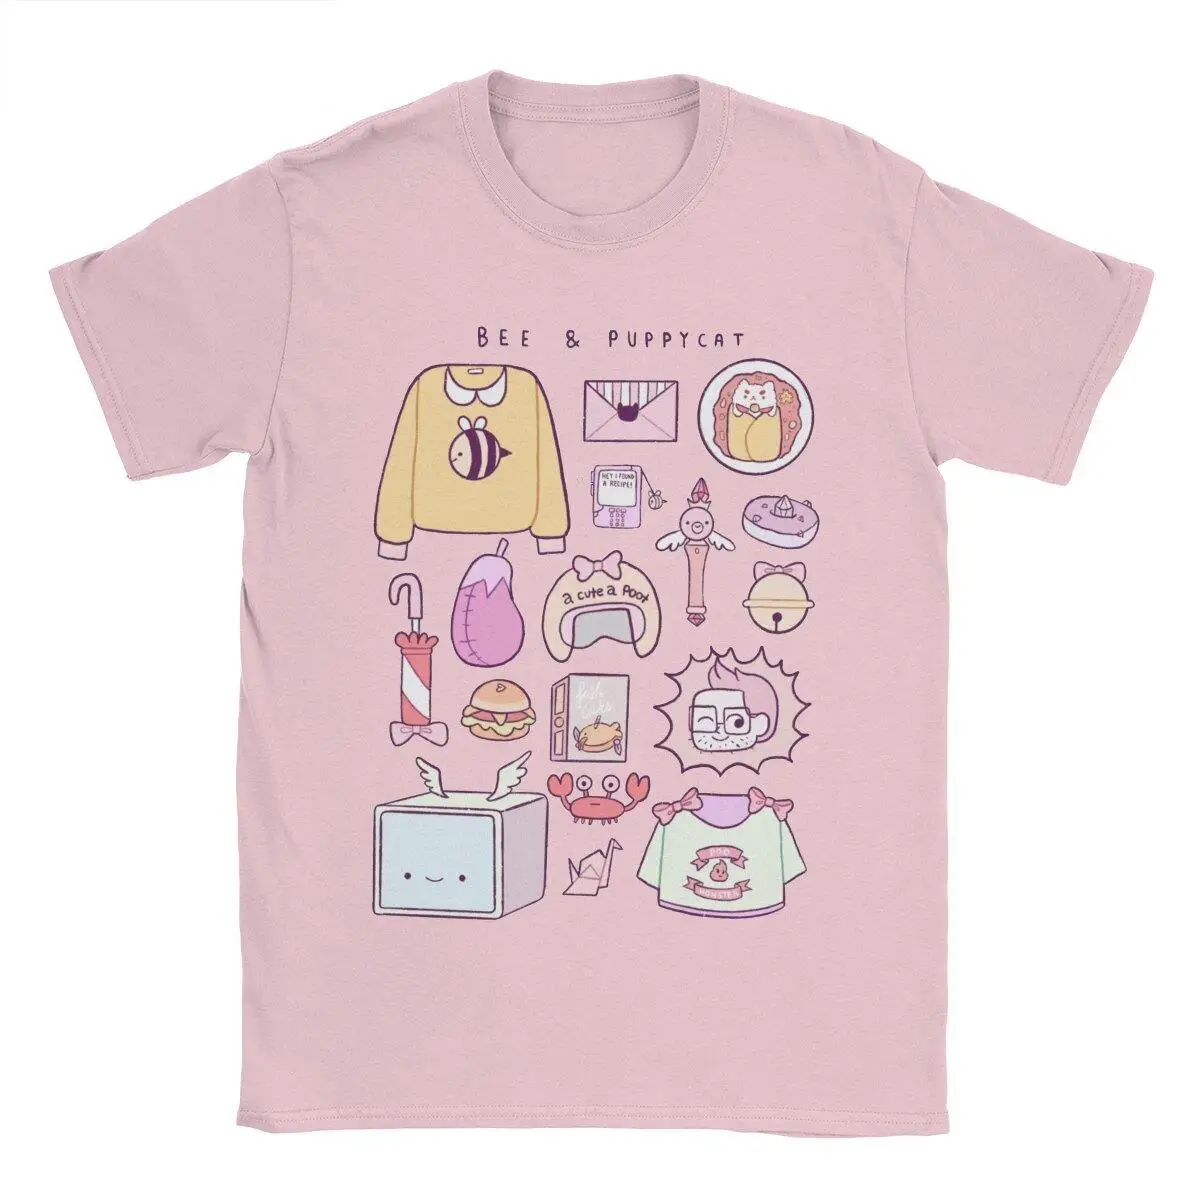 

Bee And Puppycat Items T-Shirts Men Leisure Cotton Tee Shirt Round Collar Short Sleeve T Shirts Summer Clothes